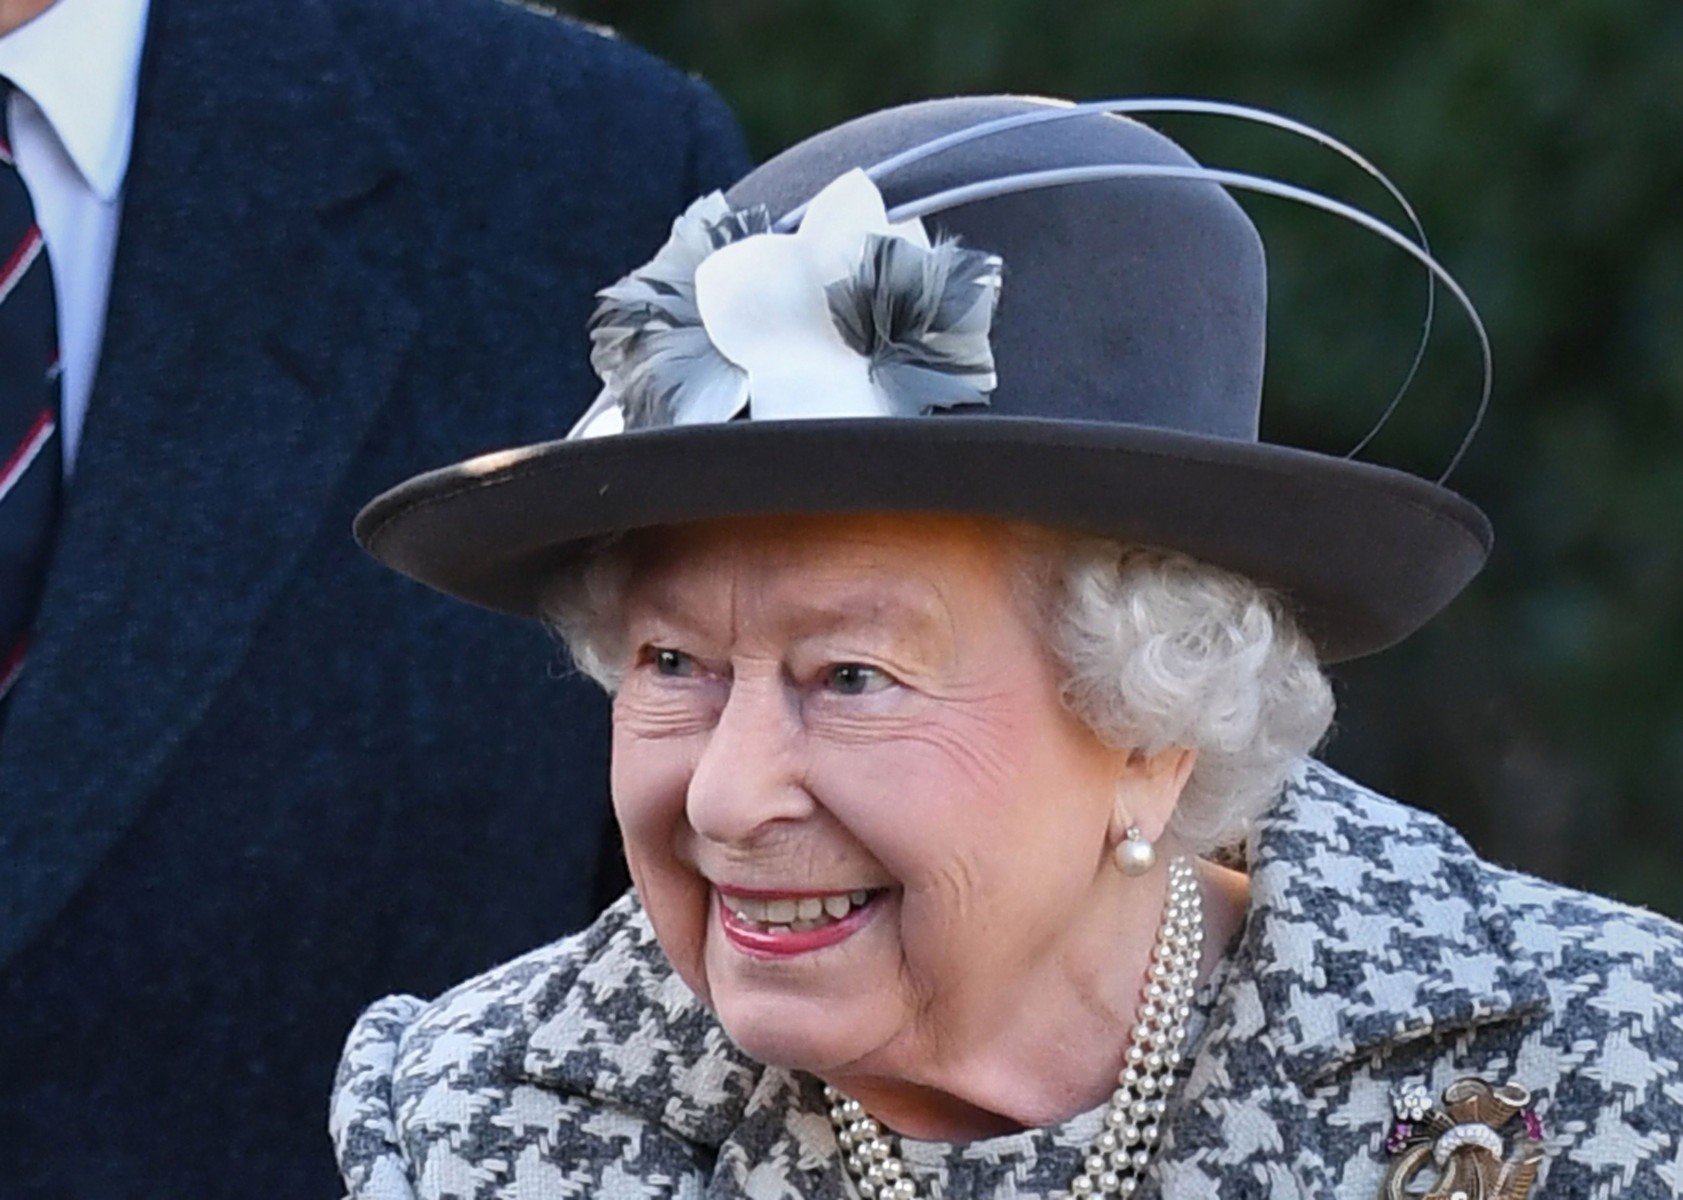 The Queen last night released details just days after crunch talks with her grandson